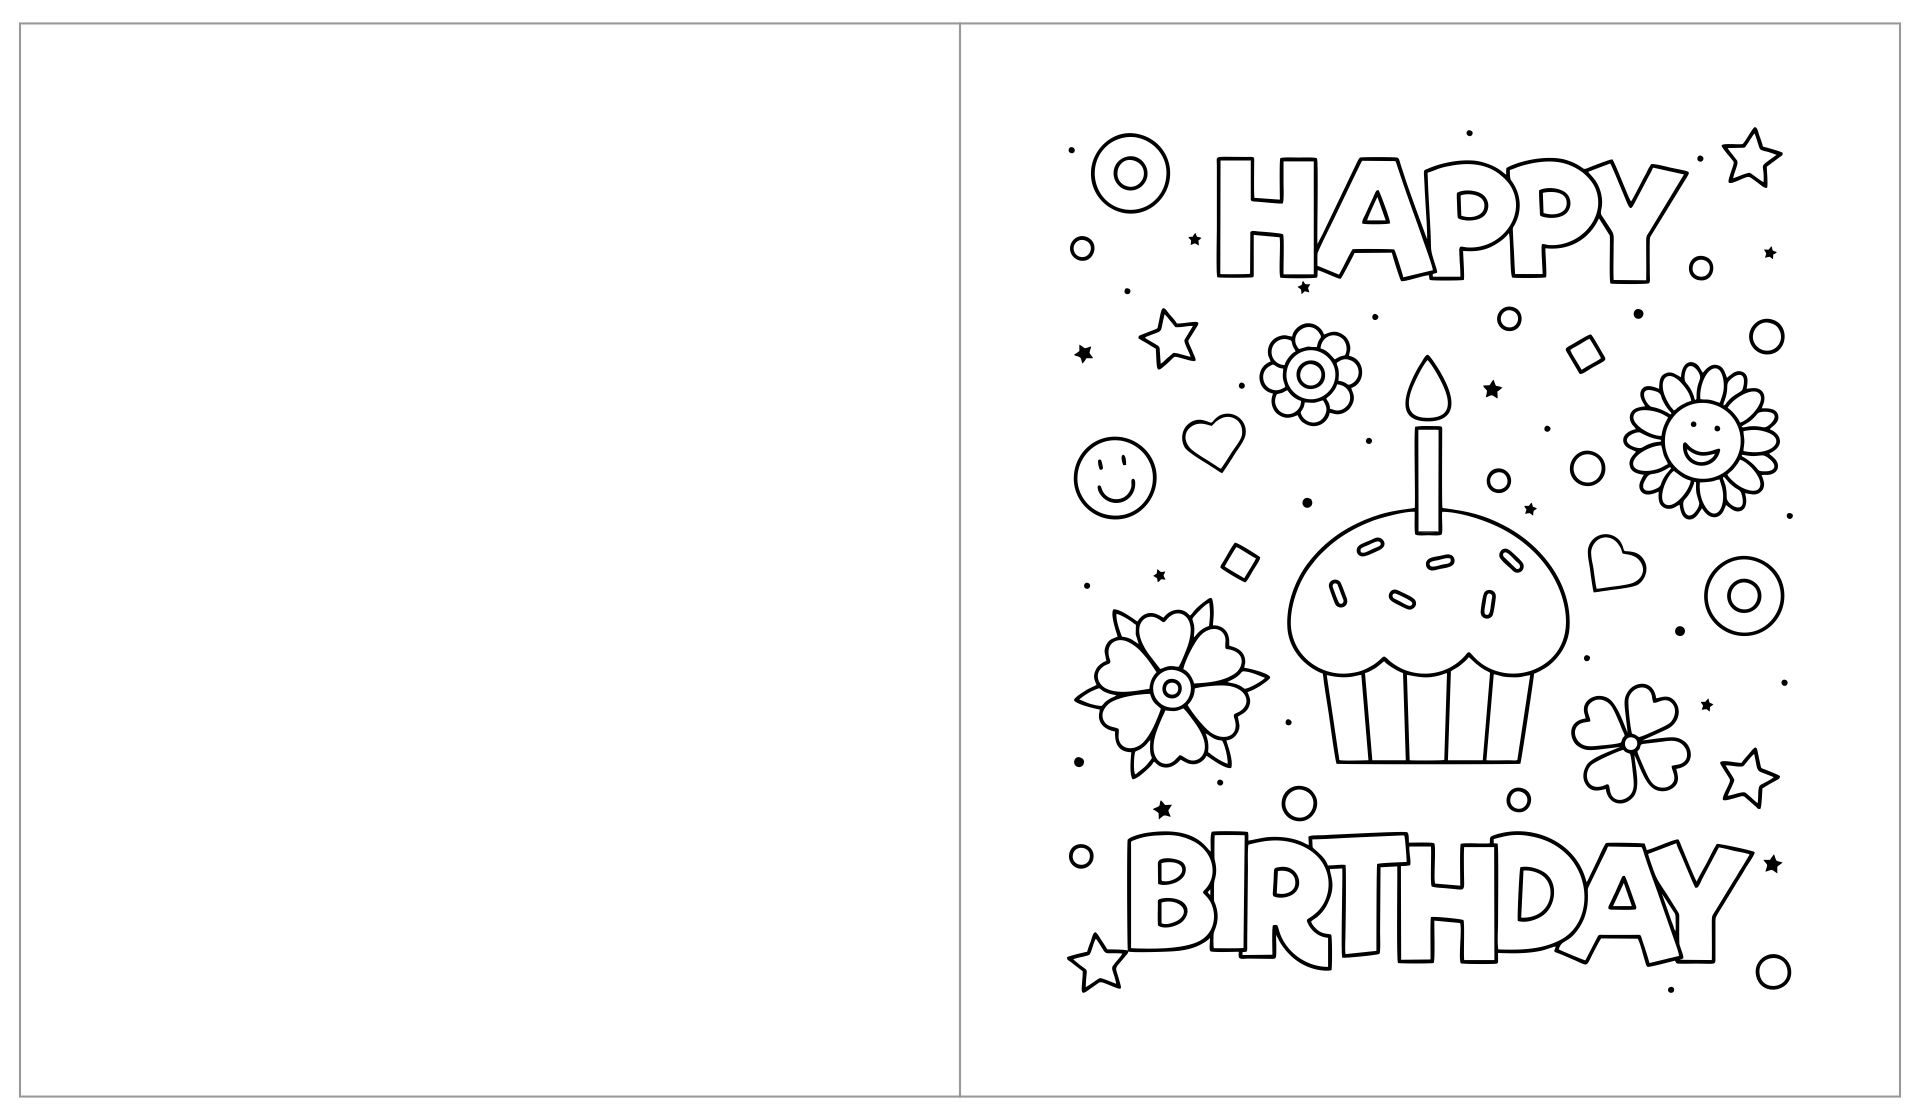 Printable Birthday Cards To Color_63825